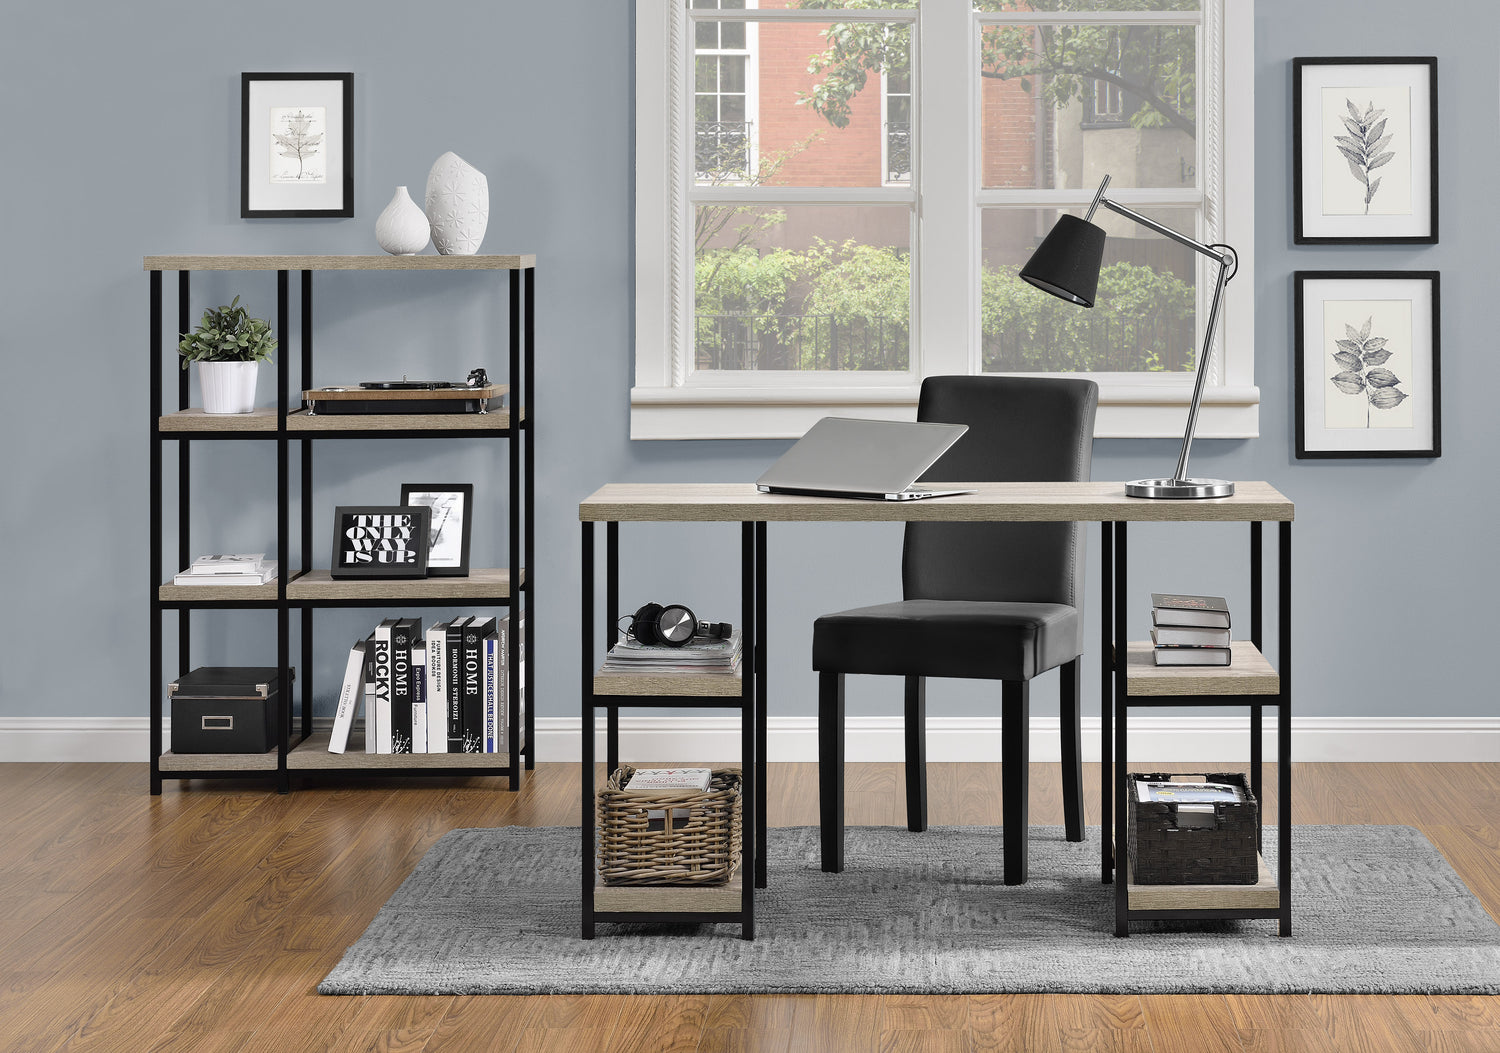 Dorel Home Elmwood Bookcase As An Office Bookcase-Better Bed Company